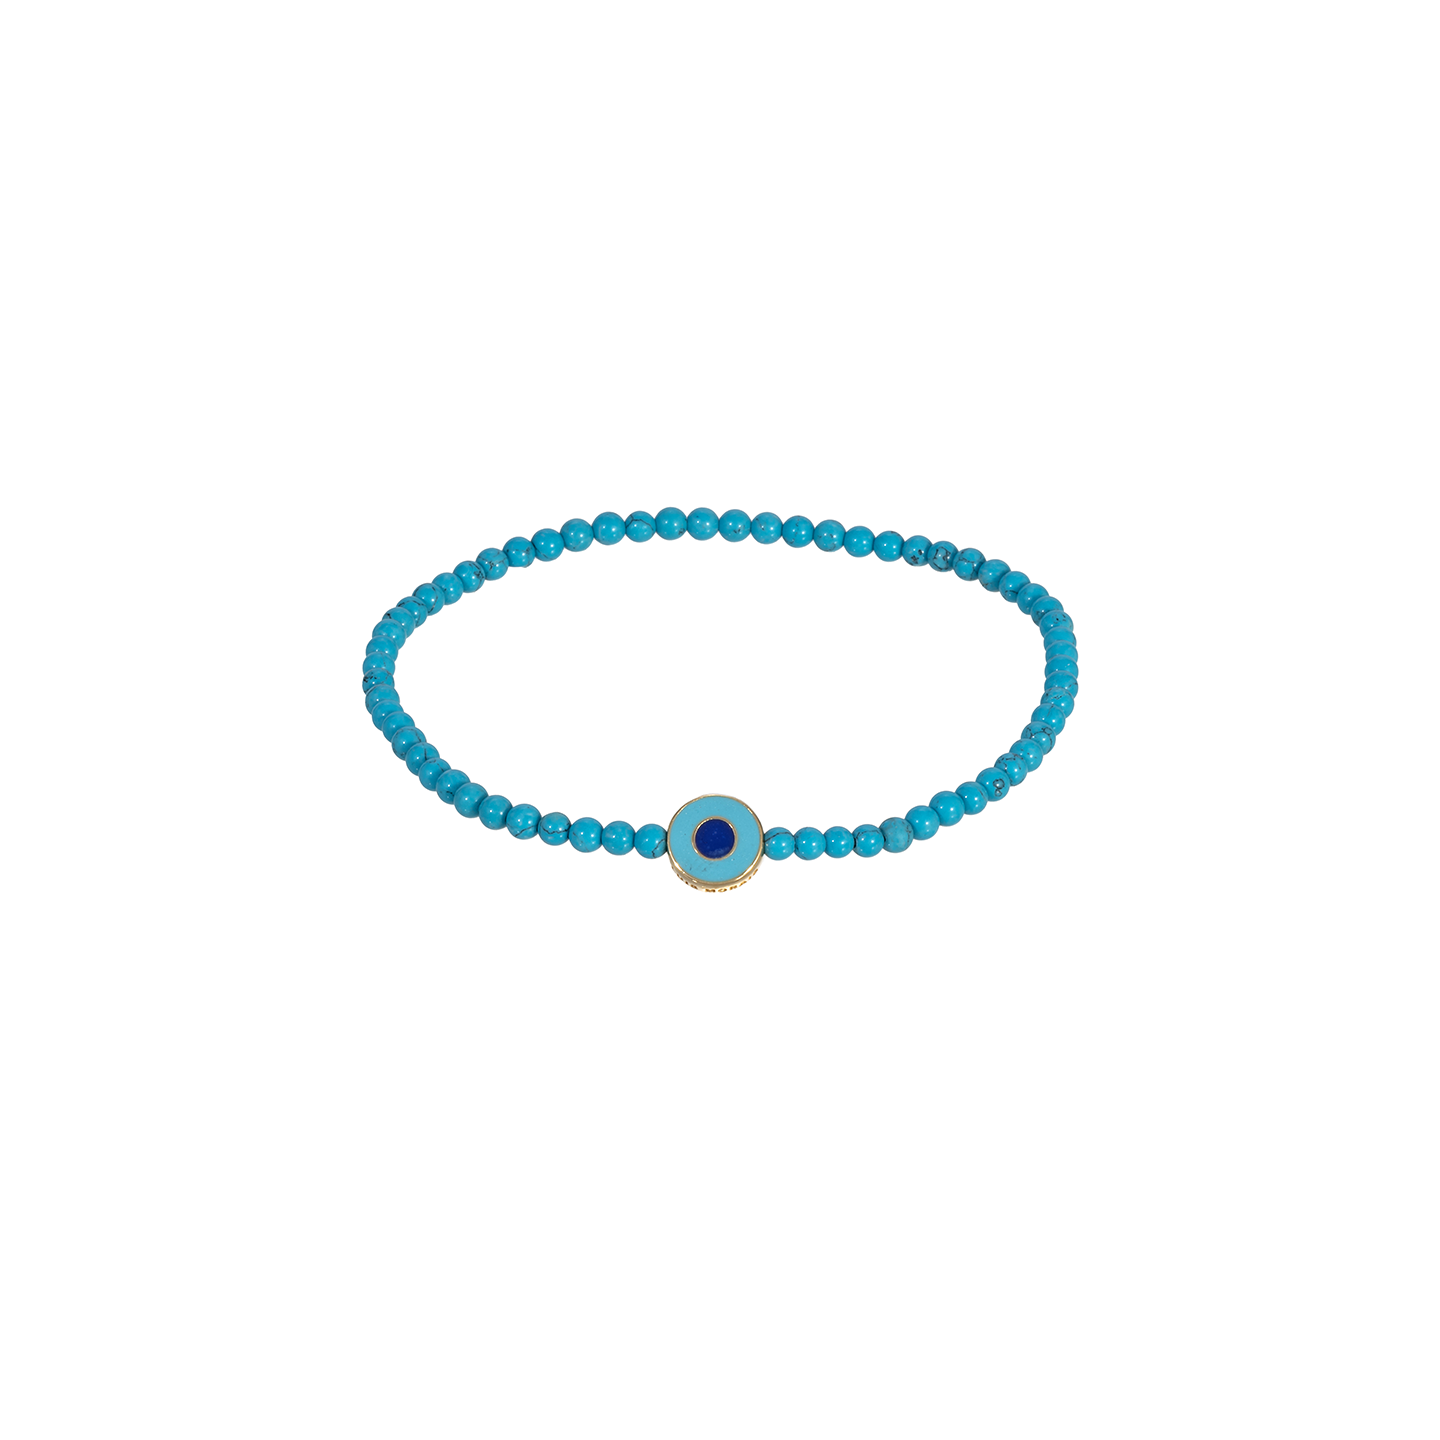 Luis Morais Small Disk with Recessed Enameled Turquoise and Blue Evil Eye on Turquoise Gemstone Beaded Bracelet